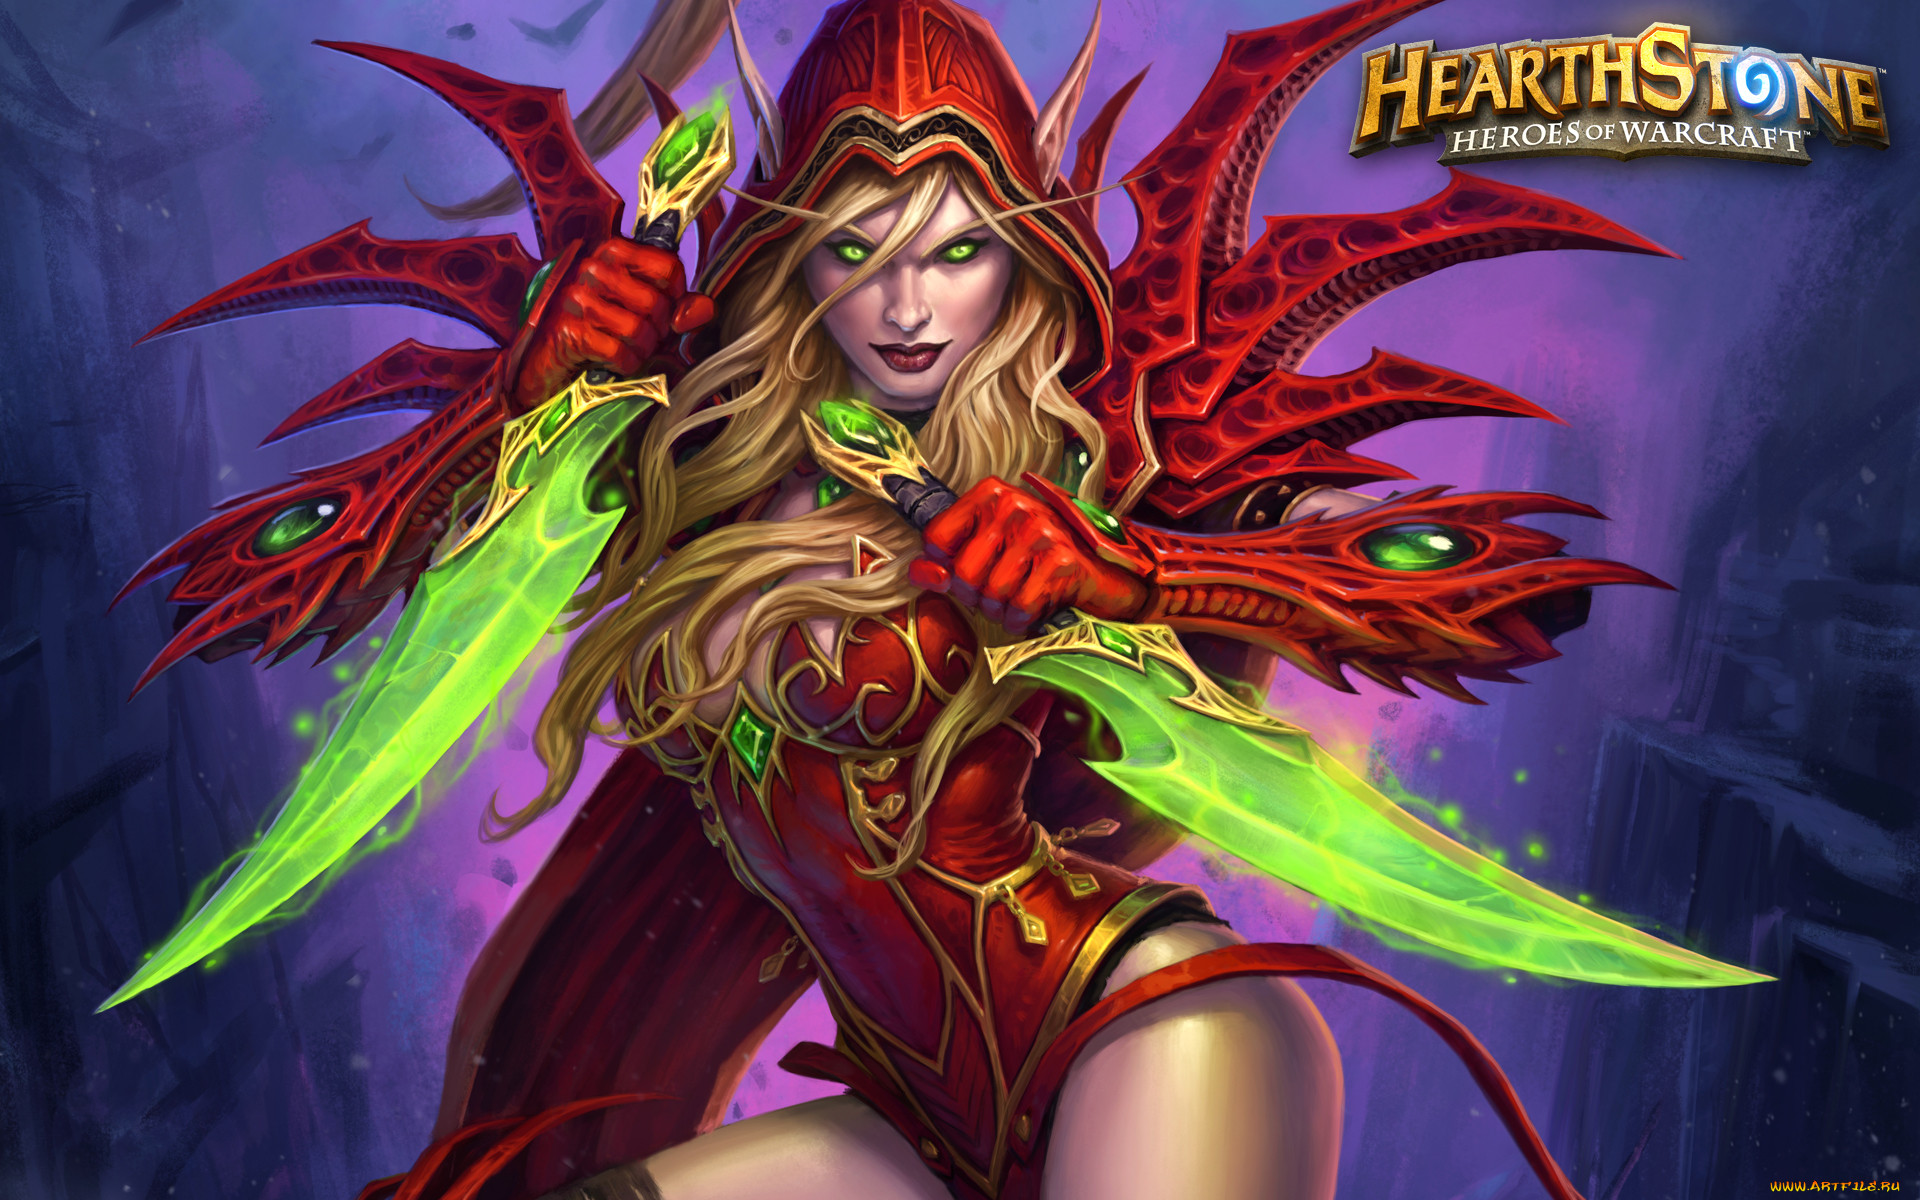  , hearthstone,  heroes of warcraft, heroes, of, warcraft, action, , 